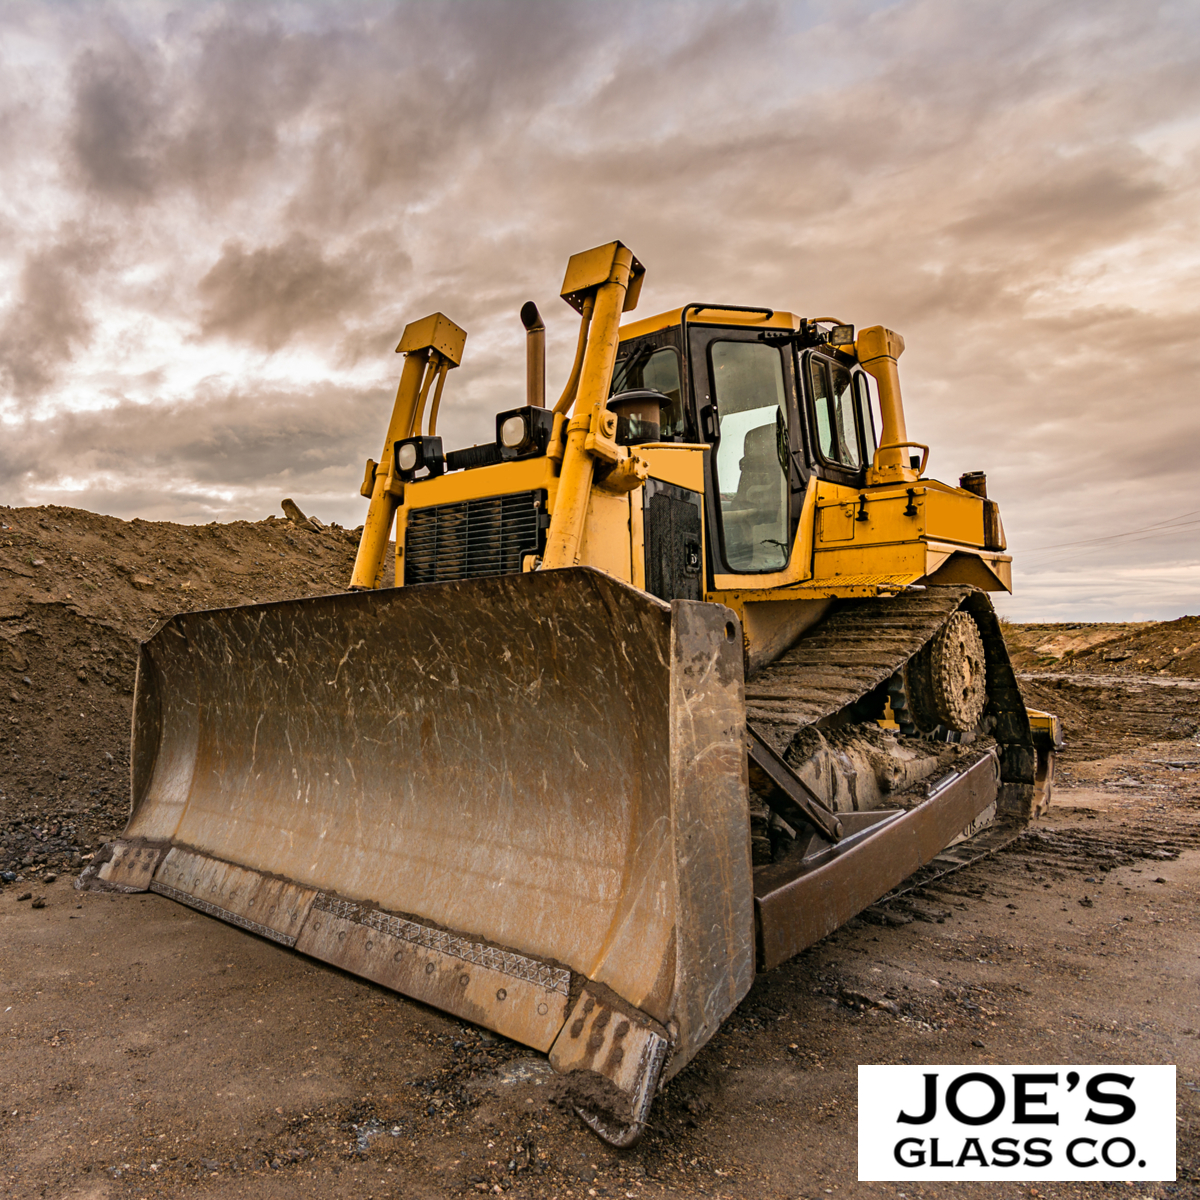 Joe’s Glass Co. is a Construction Company’s Go-To for Heavy Equipment Glass Replacements!